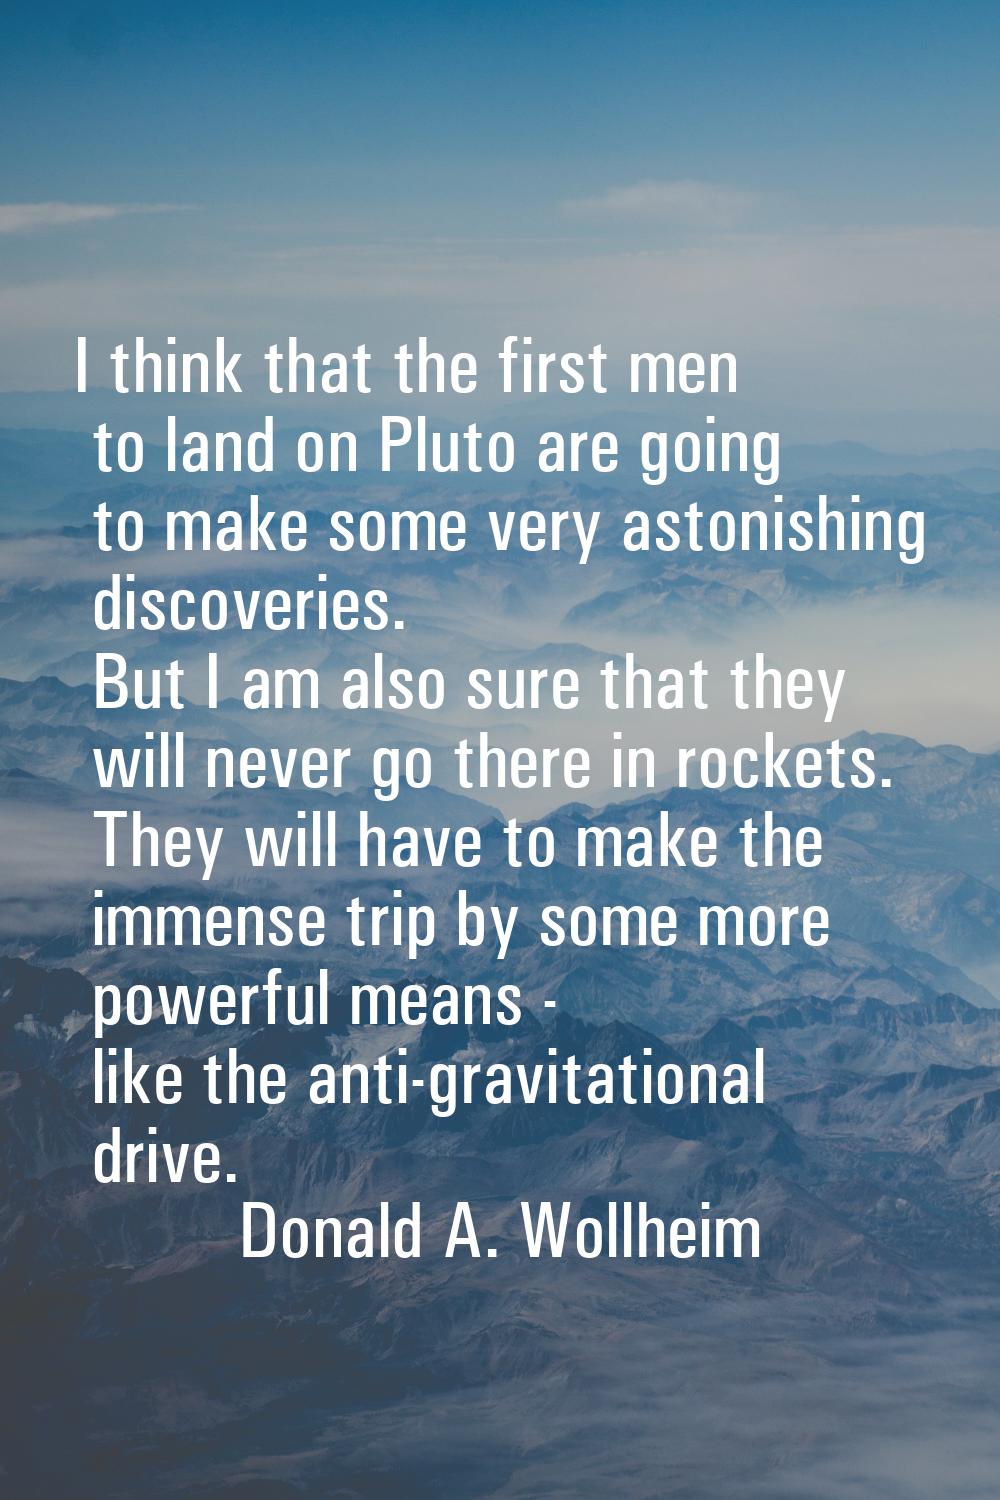 I think that the first men to land on Pluto are going to make some very astonishing discoveries. Bu